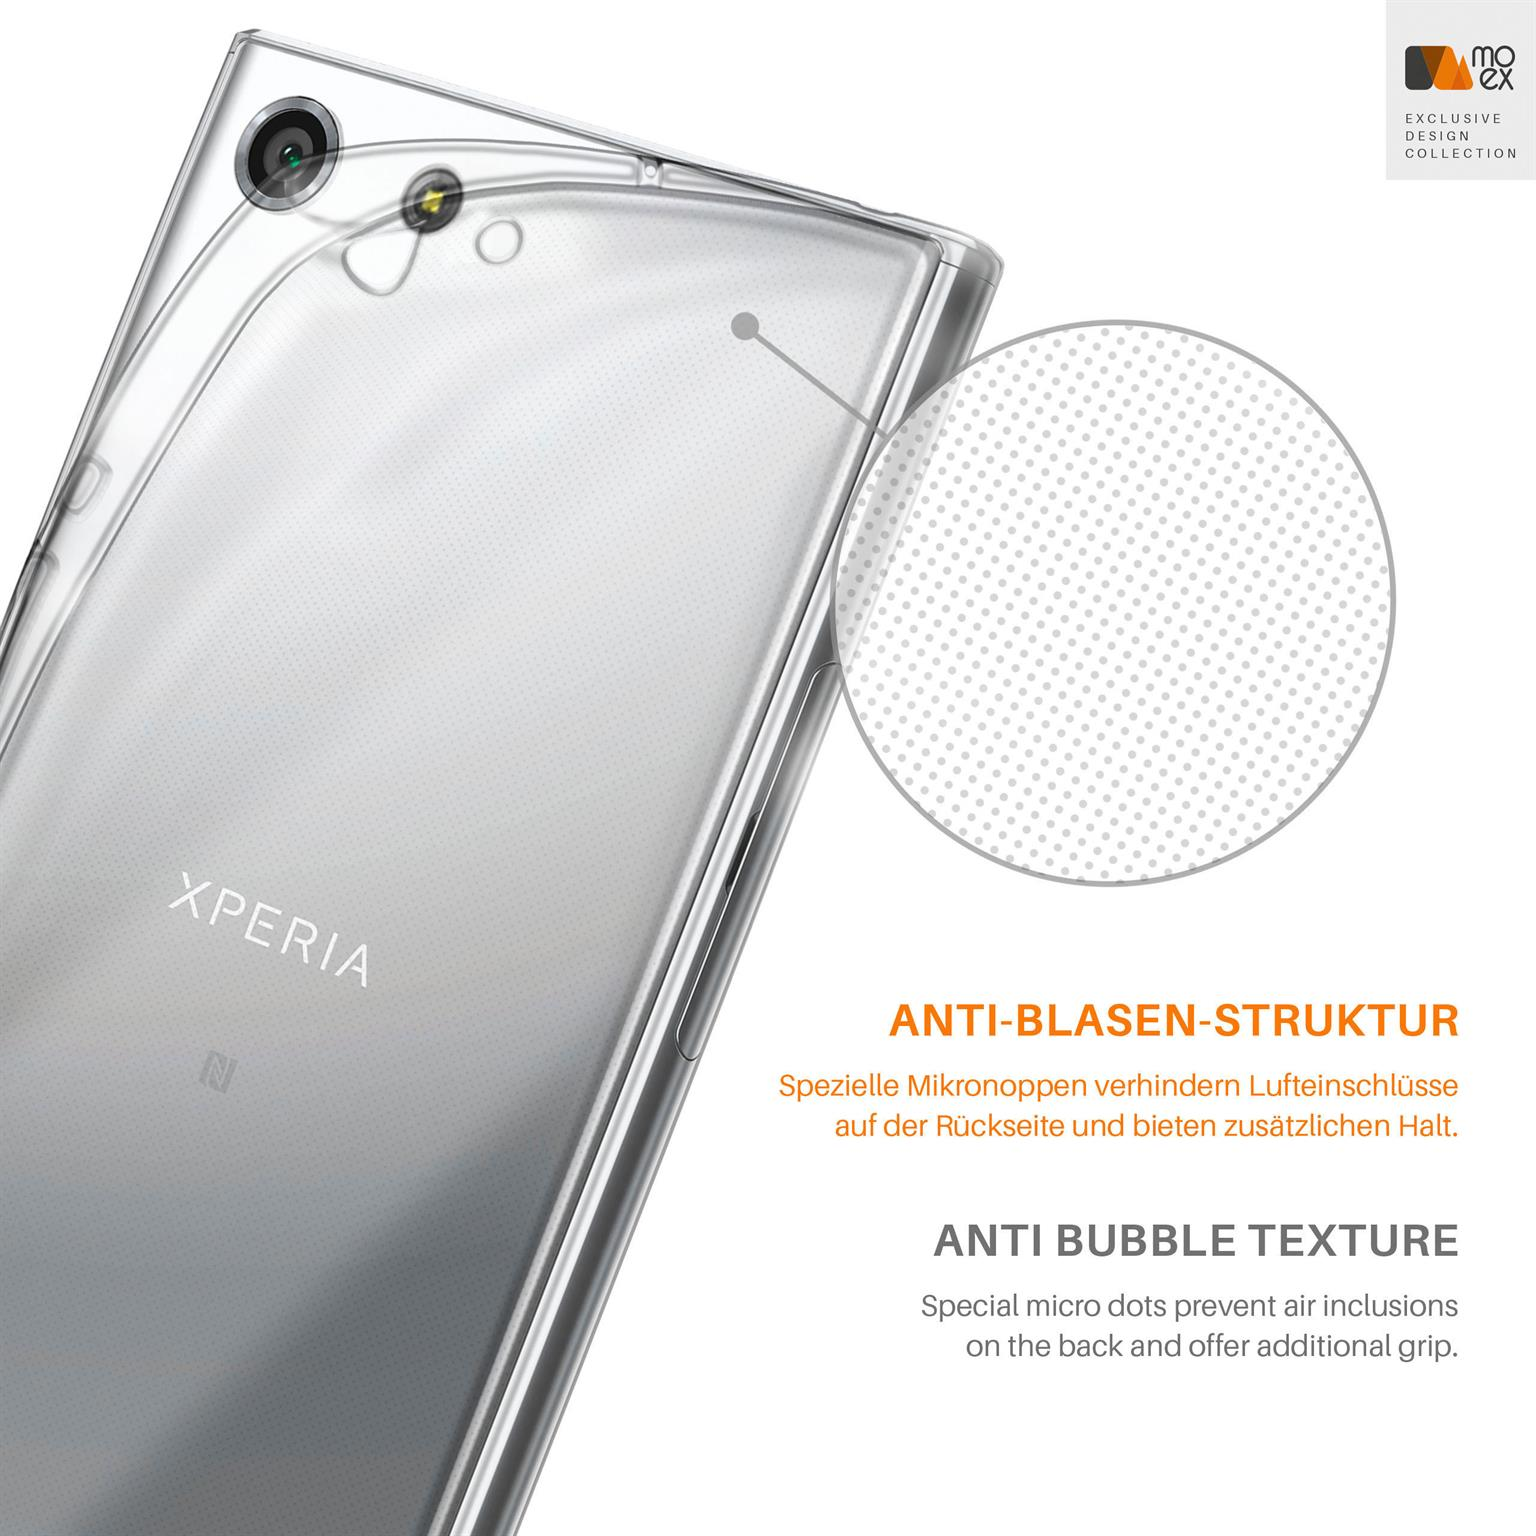 MOEX Aero Case, Backcover, Sony, Crystal-Clear M5, Xperia